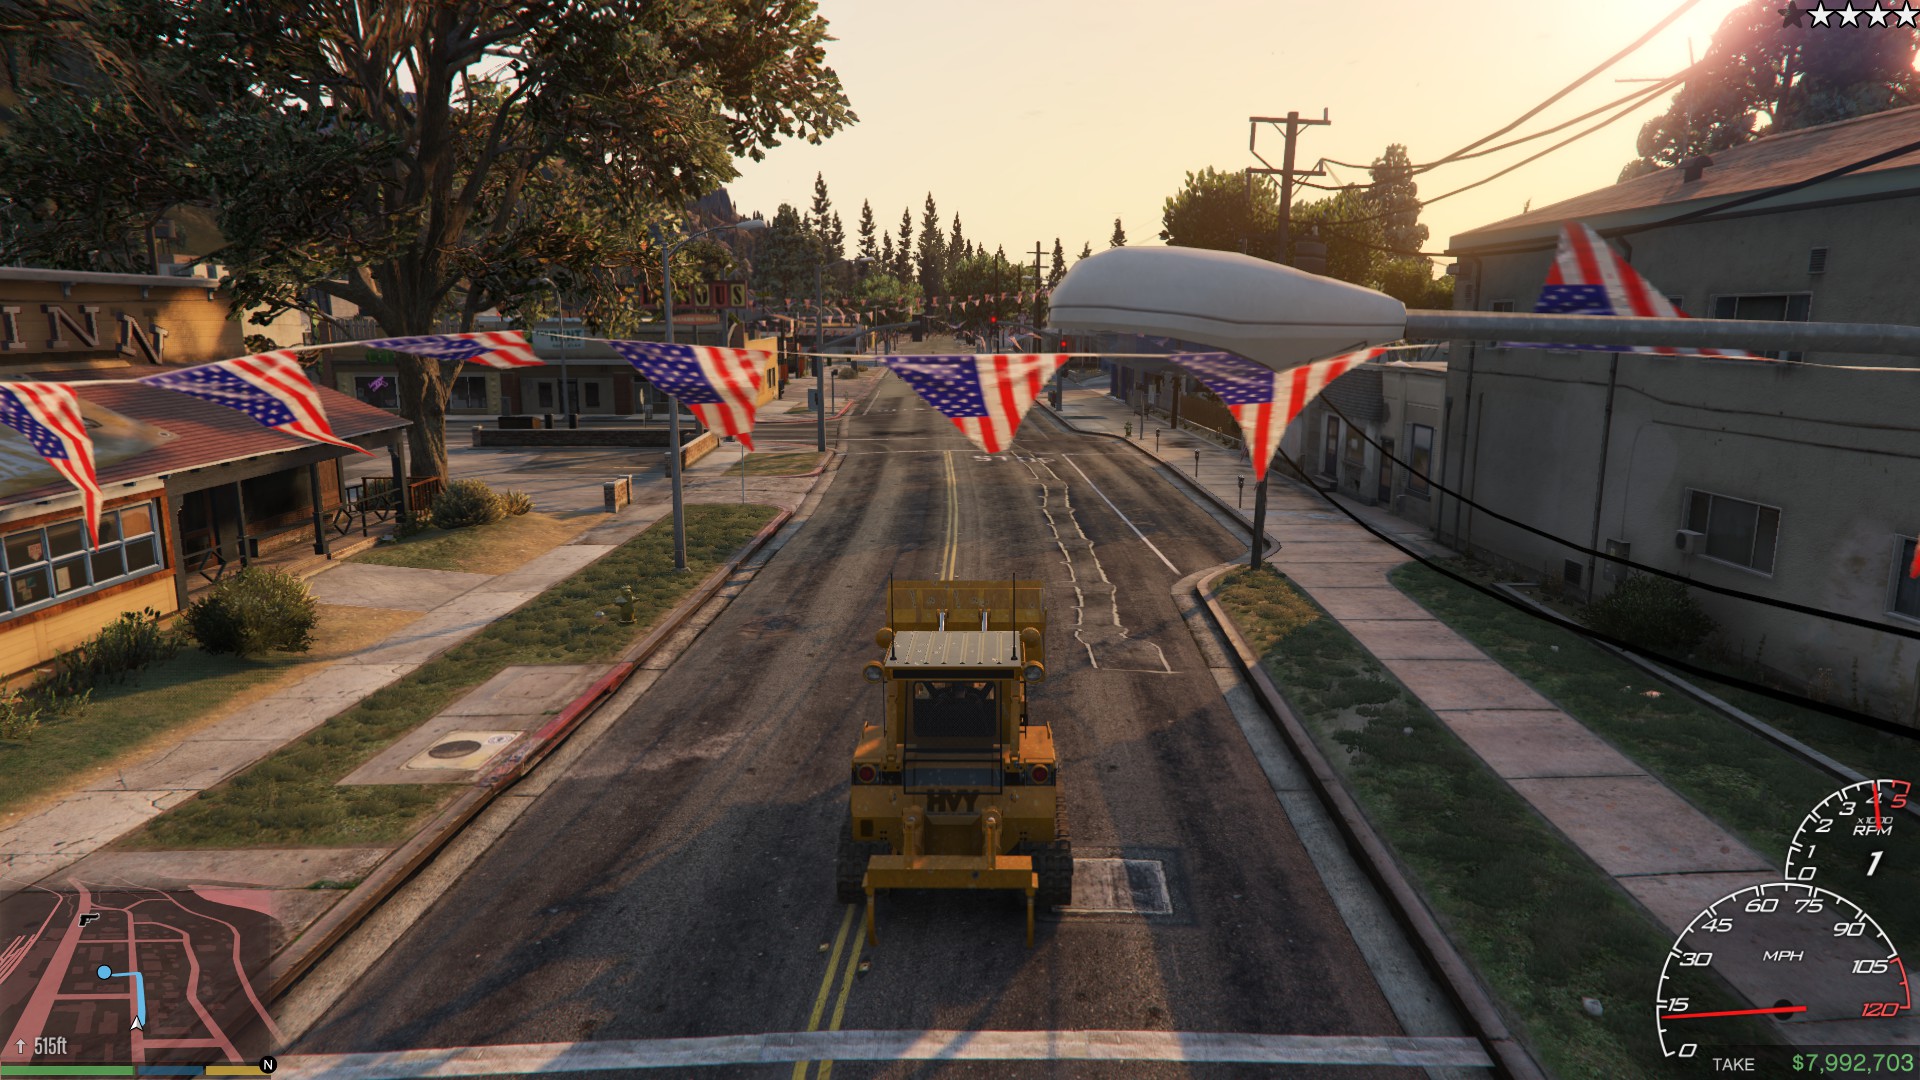 Steam Community :: Guide :: How to mod GTAV. Includes: Graphics